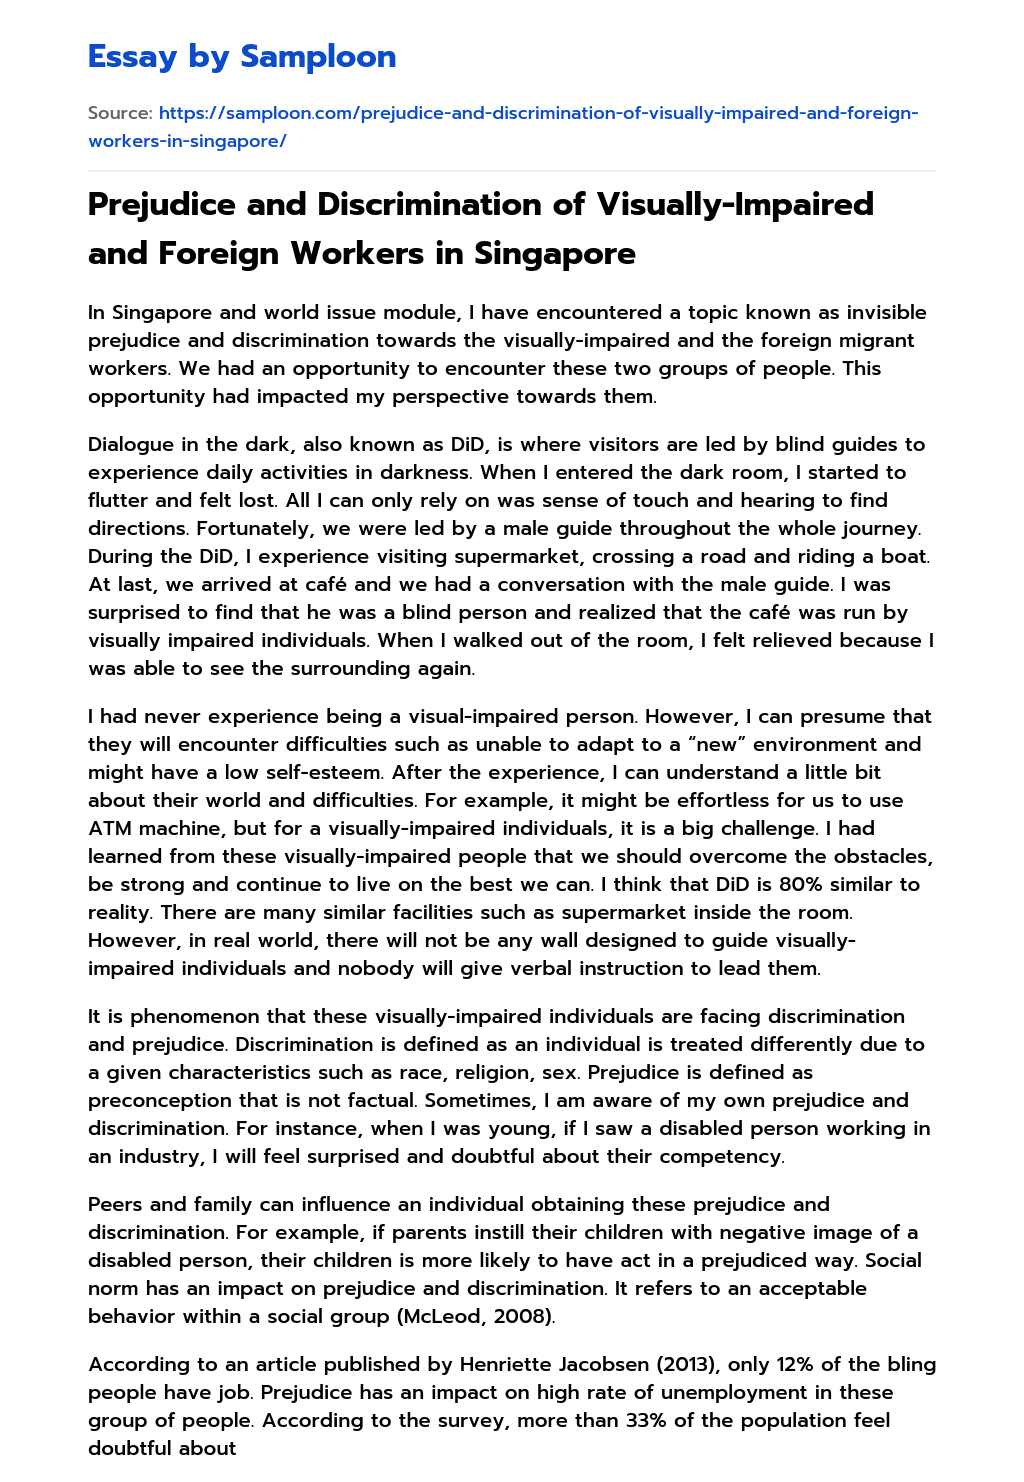 foreign workers essay